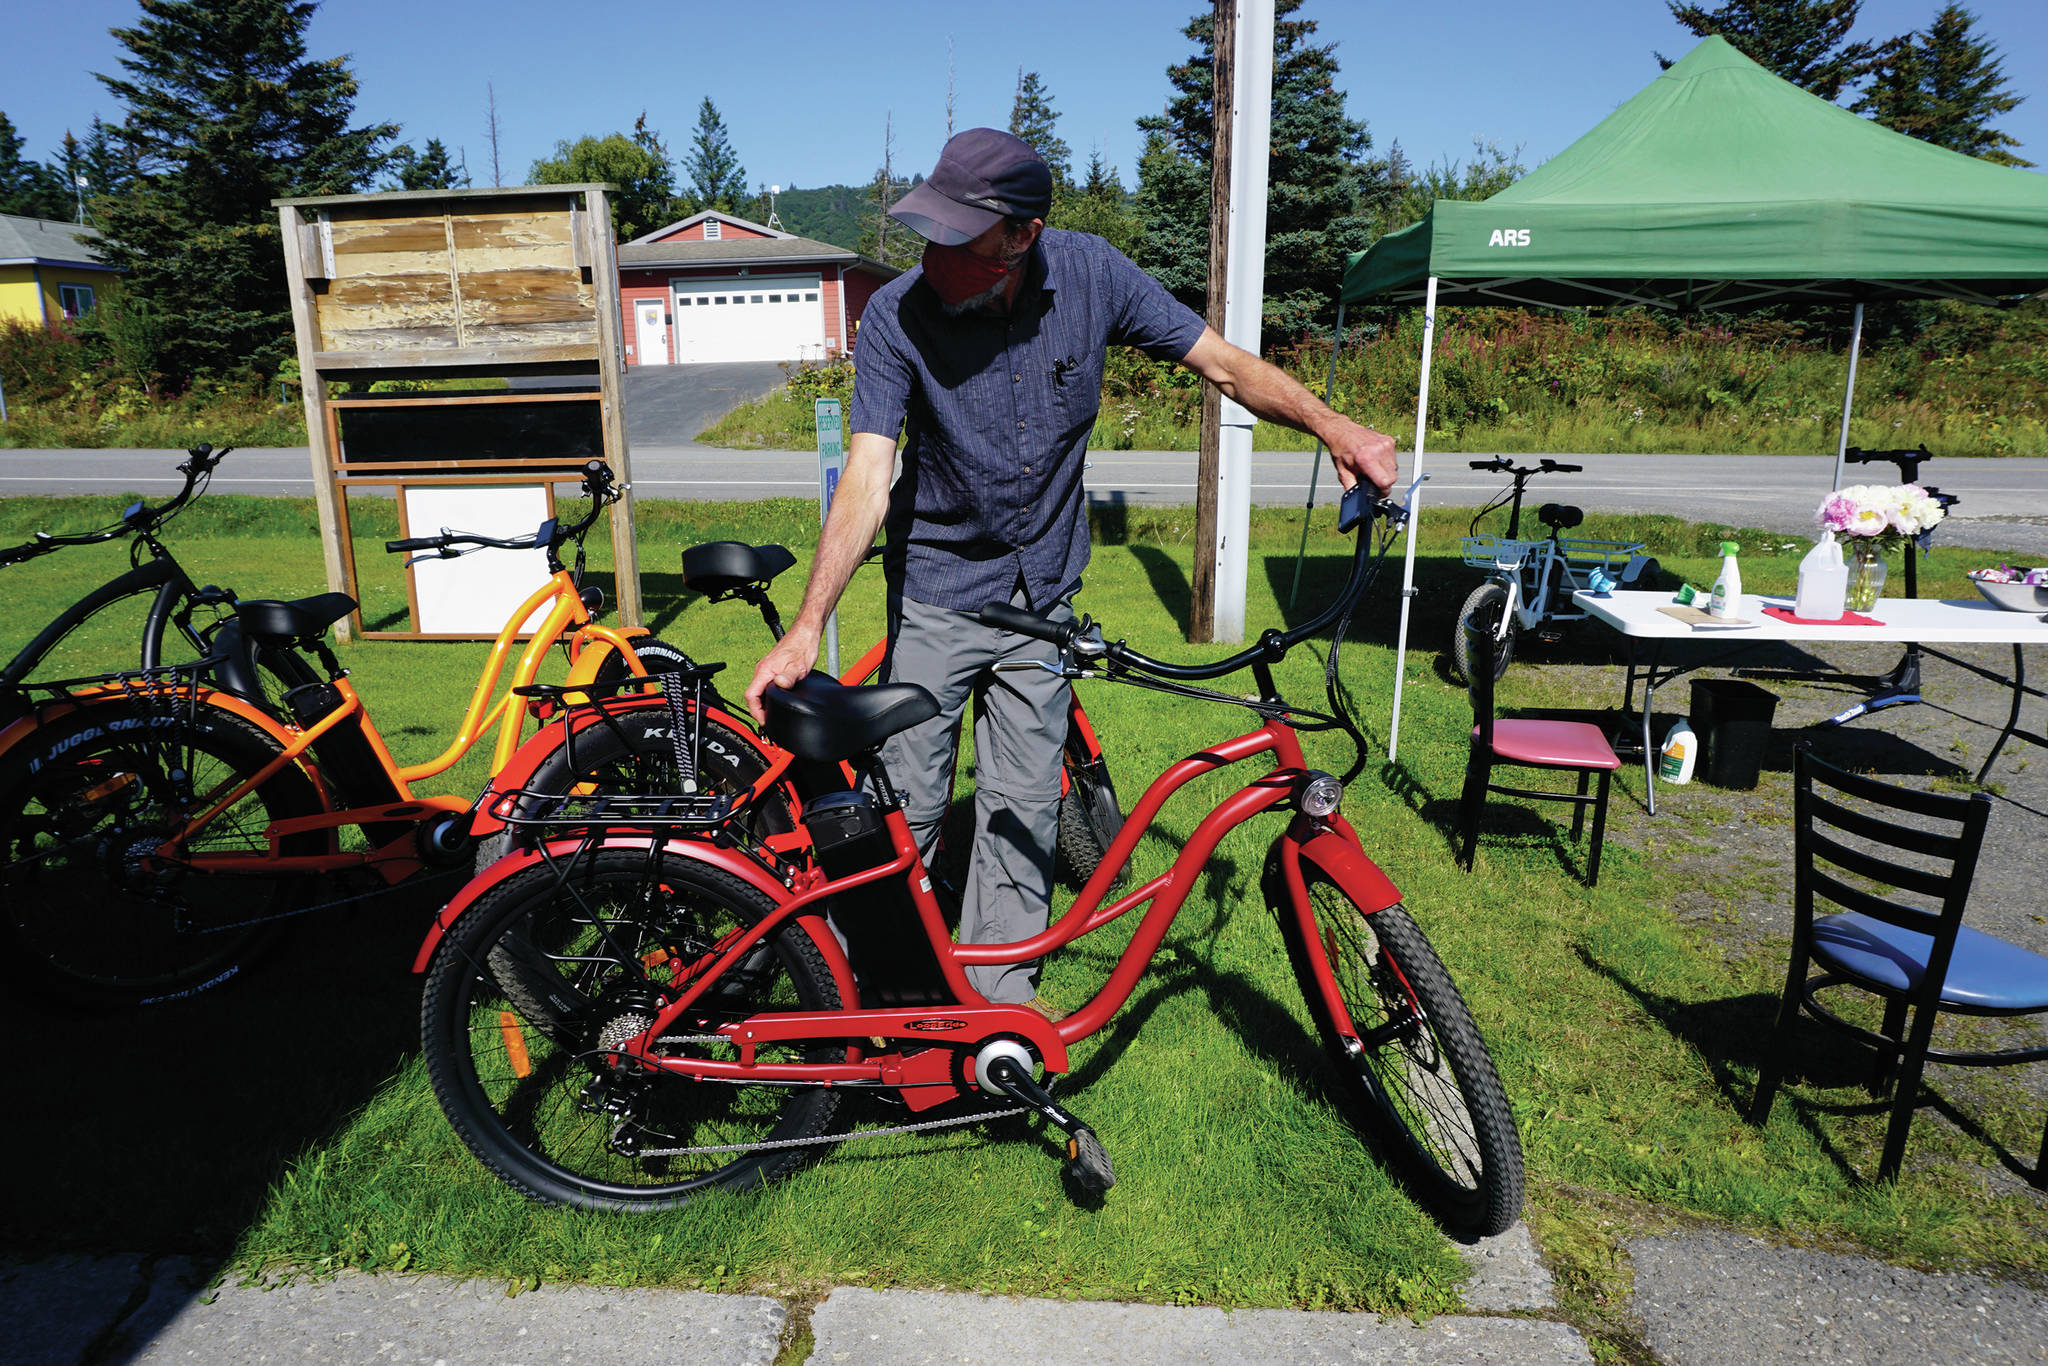 Dale Banks, owner of LoopEride, displays some of the electric-motor assist bicycles at an open house held Friday, Aug. 21, 2020, at his showroom on East Bunnell Avenue in Homer, Alaska. (Photo by Michael Armstrong/Homer News)